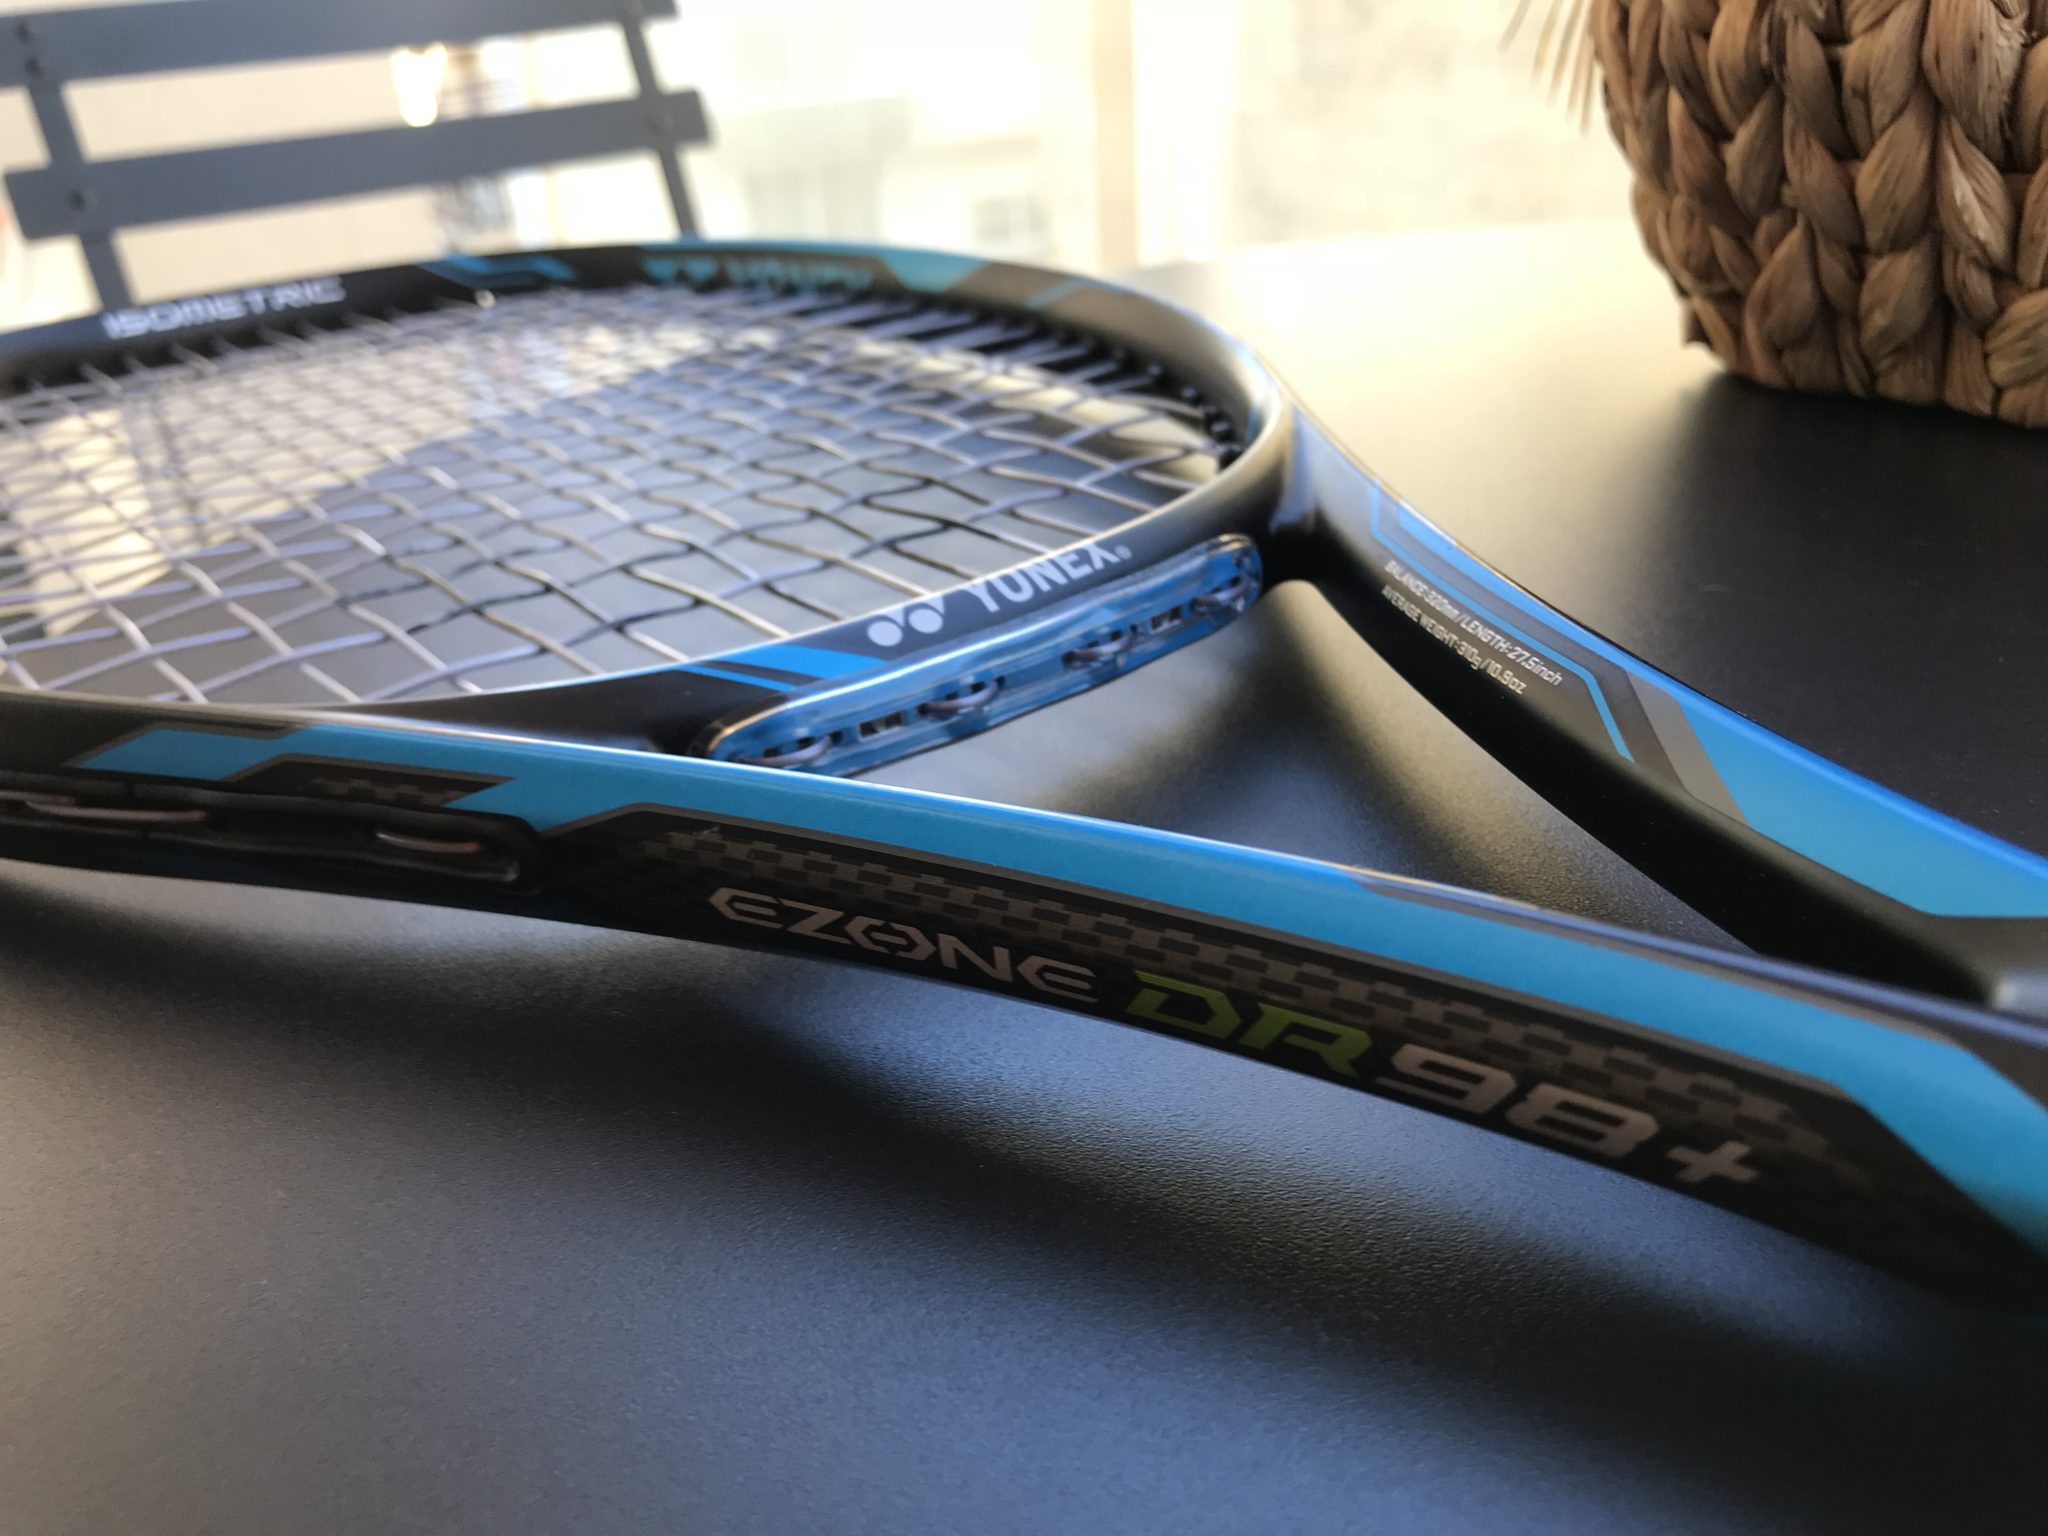 Yonex DR 98+ Racquet Review - Is it as good as everyone says it is?